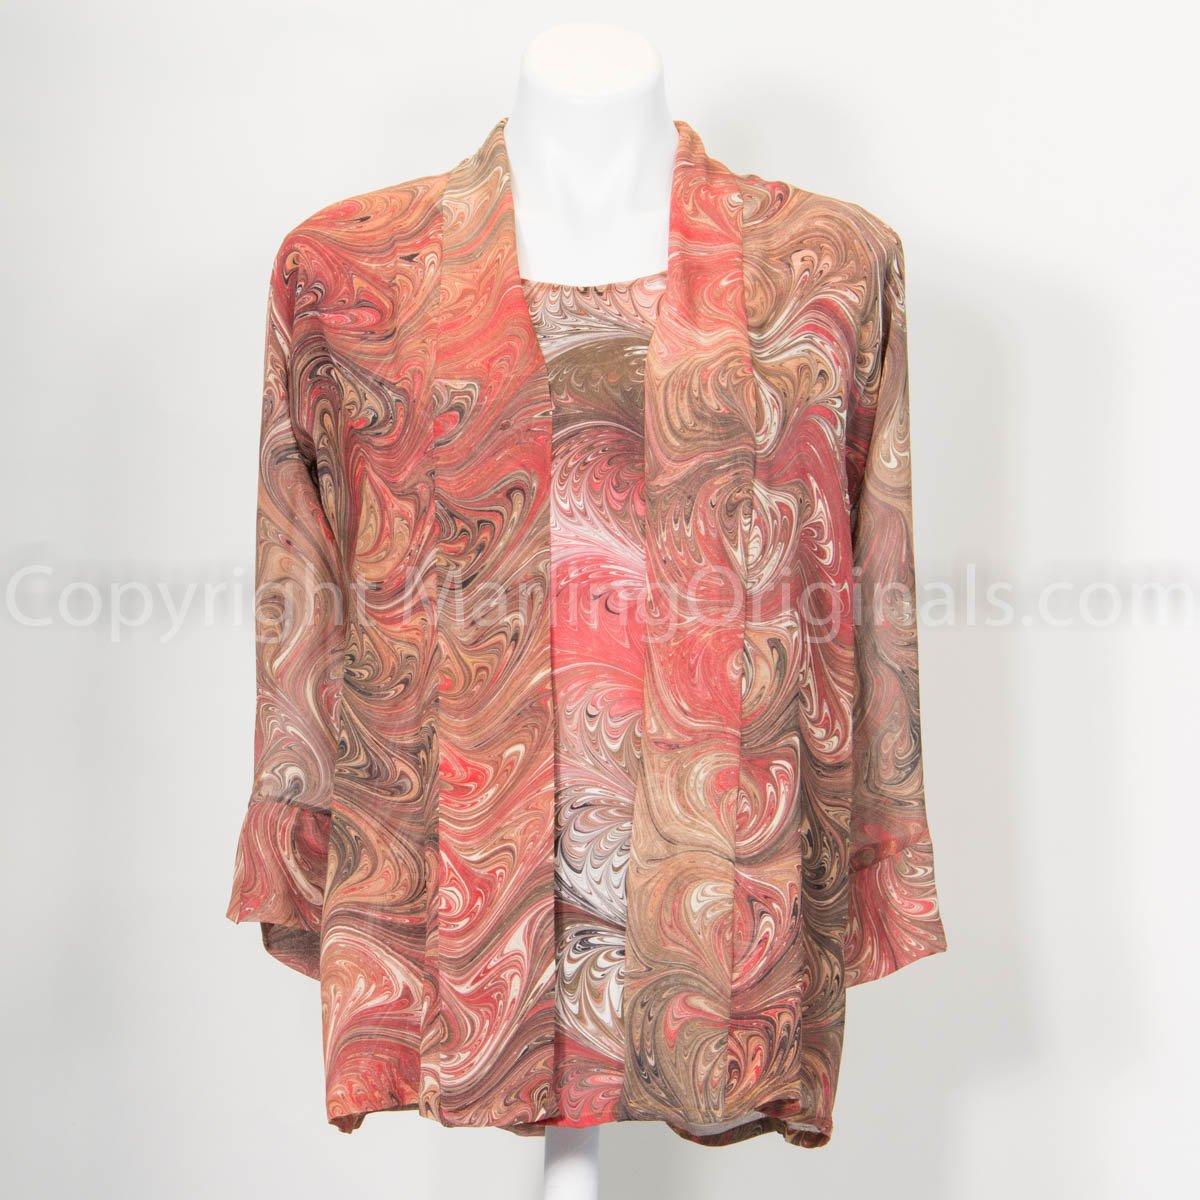 silk kimono jacket hand marbled in coral, salmon, cream.  Shown with matching silk top.